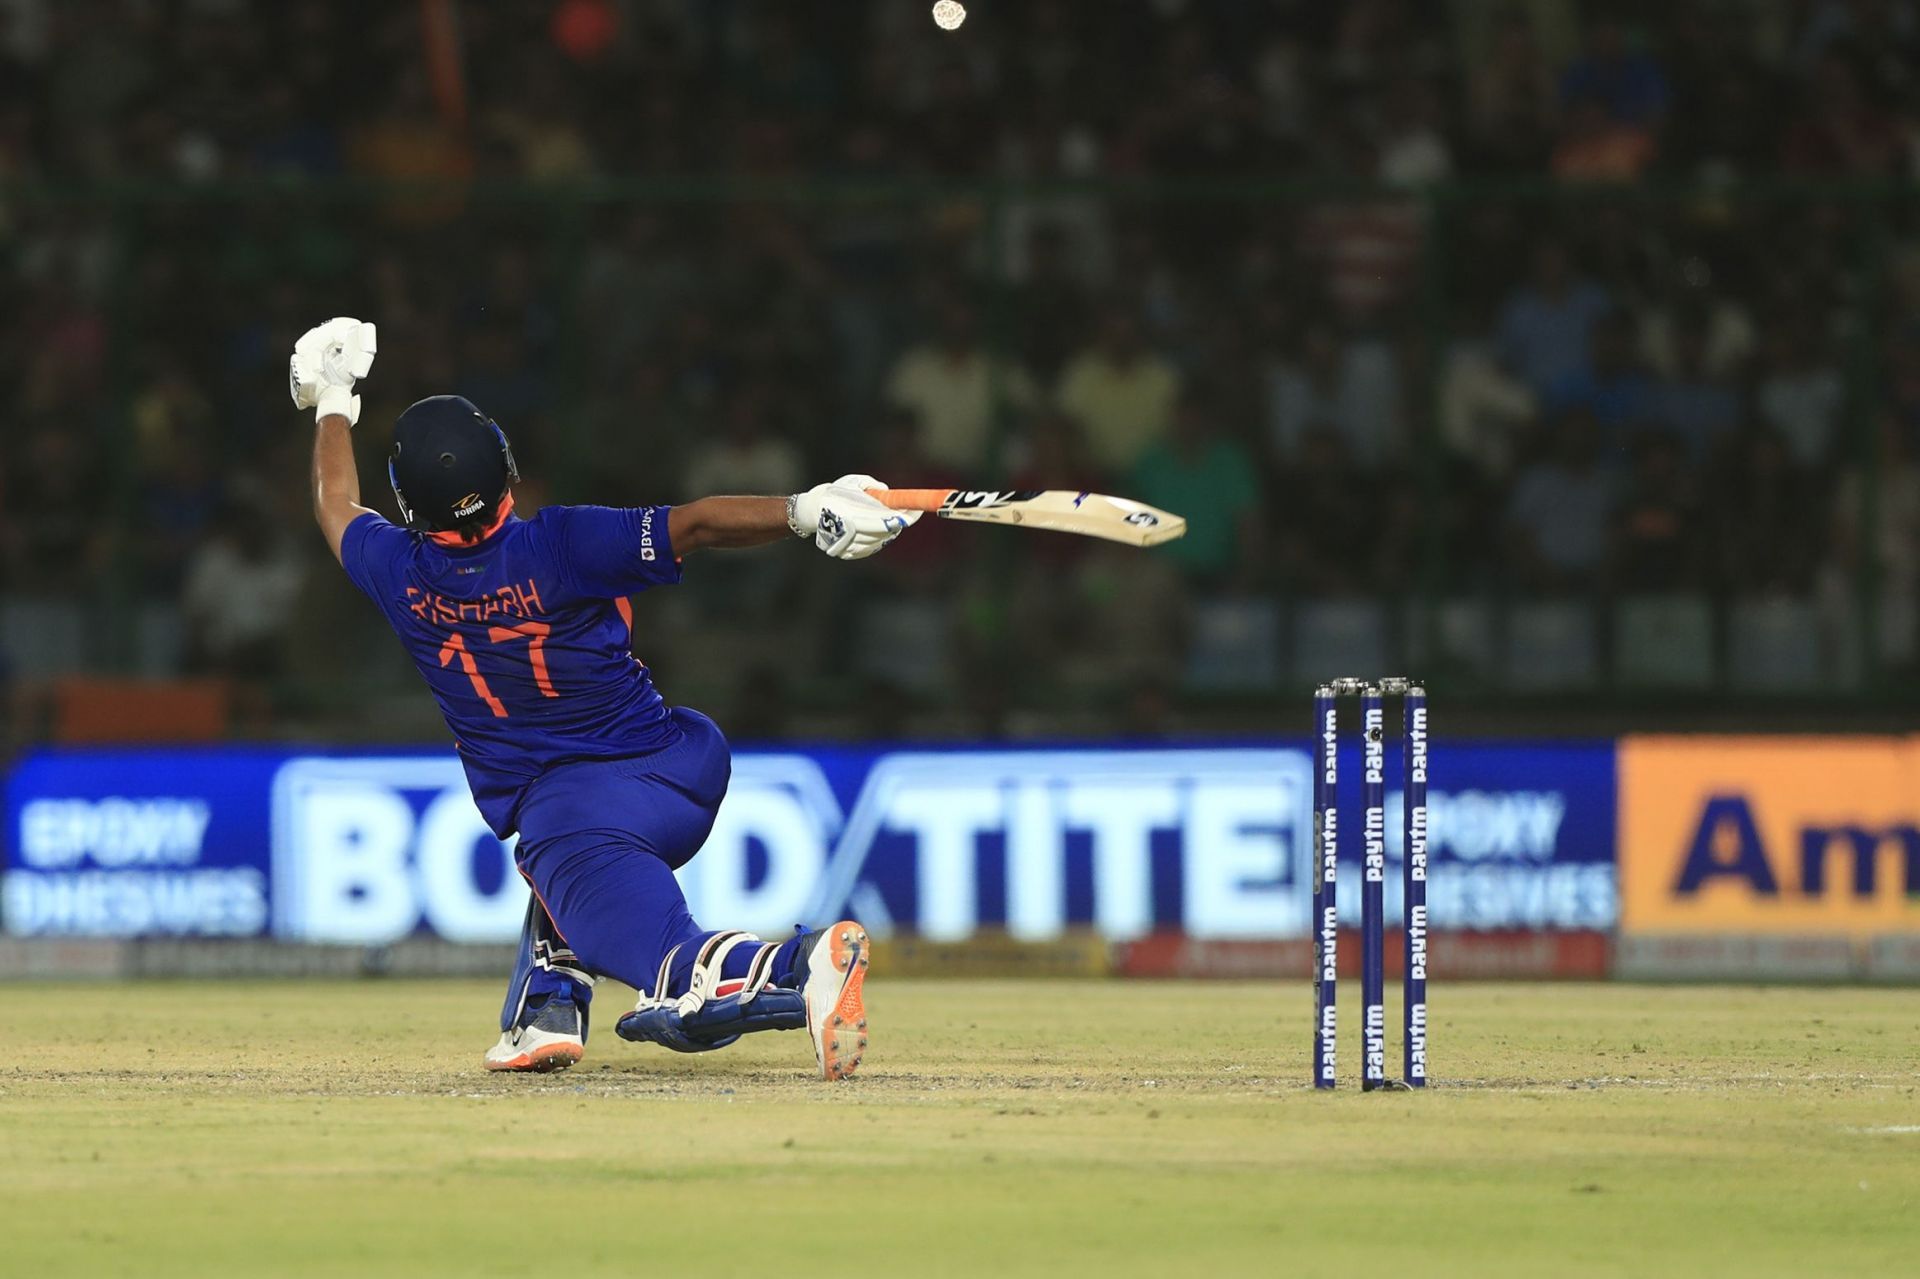 Rishabh Pant has repeatedly been dismissed while playing big shots on the off side